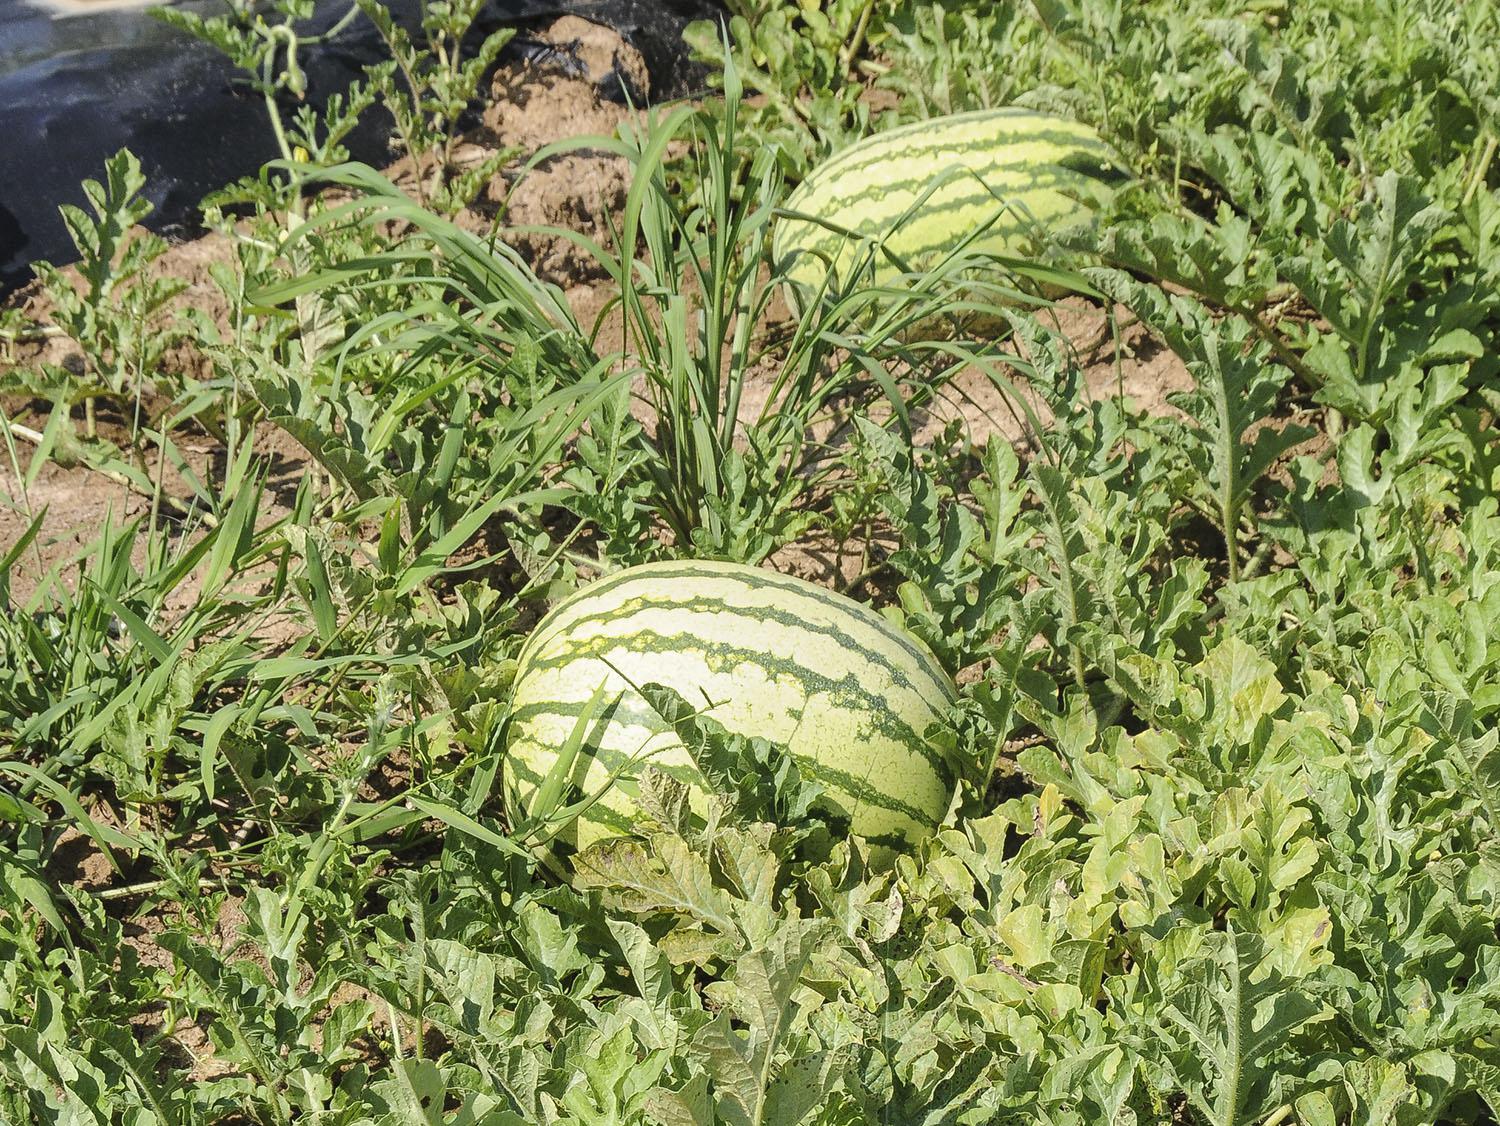 Although delayed by 2013 spring weather, these watermelons soon will be leaving the Chickasaw County field owned by Kayla and Curtis Martin, just in time for July picnic tables. (Photo by MSU Ag Communications/Scott Corey)